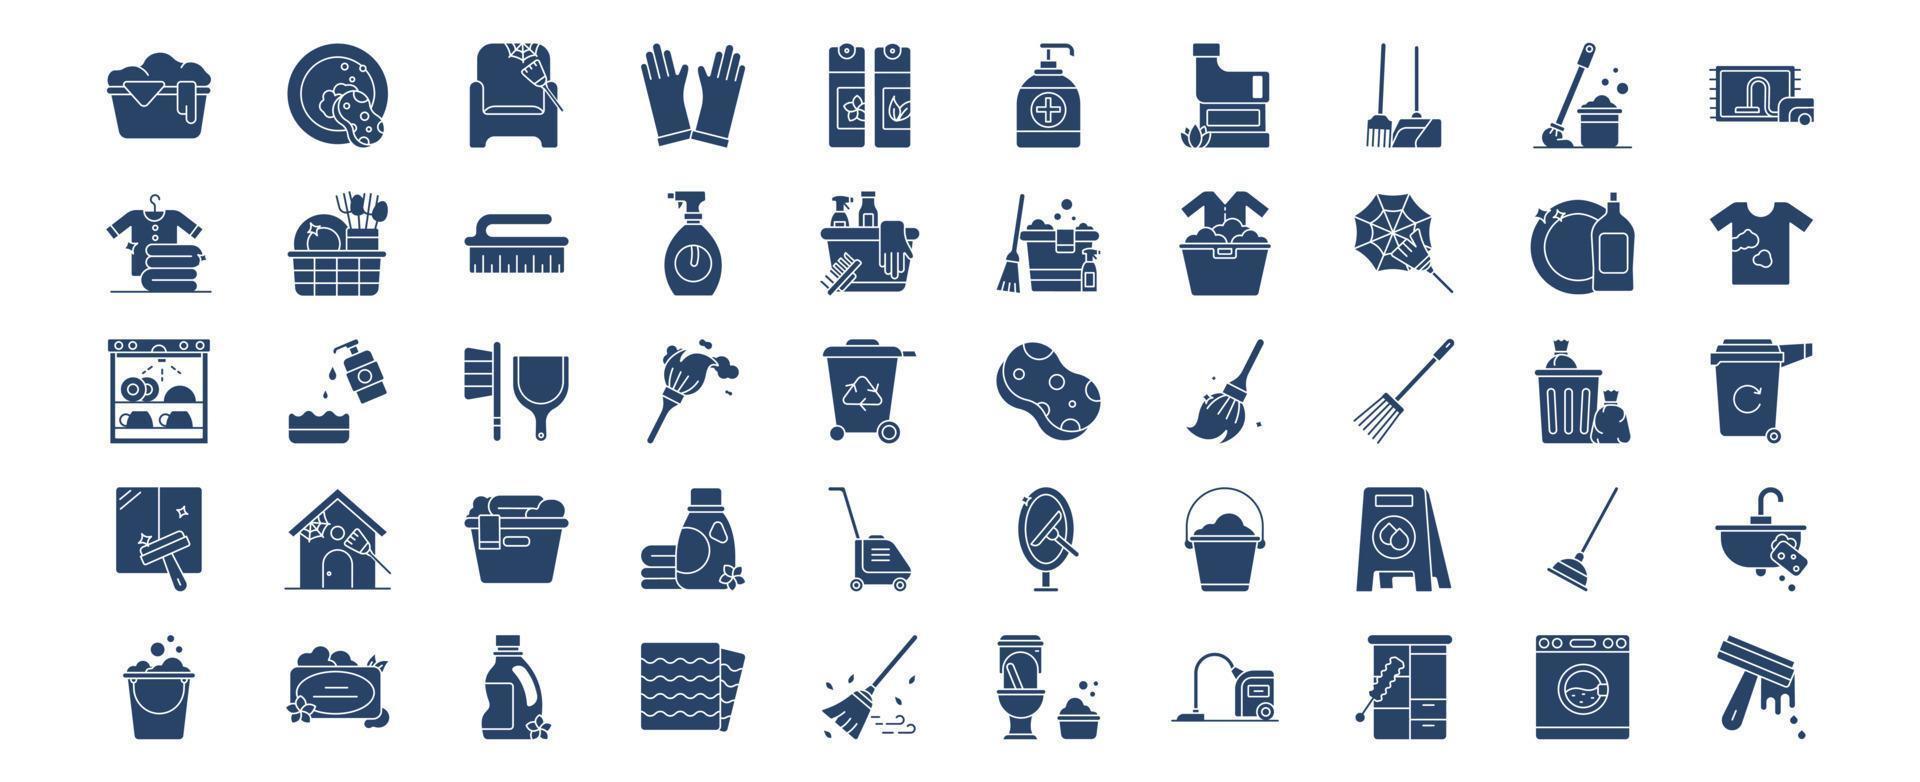 Collection of icons related to Cleaning and hygiene, including icons like Brush, bucket, Broom and more. vector illustrations, Pixel Perfect set